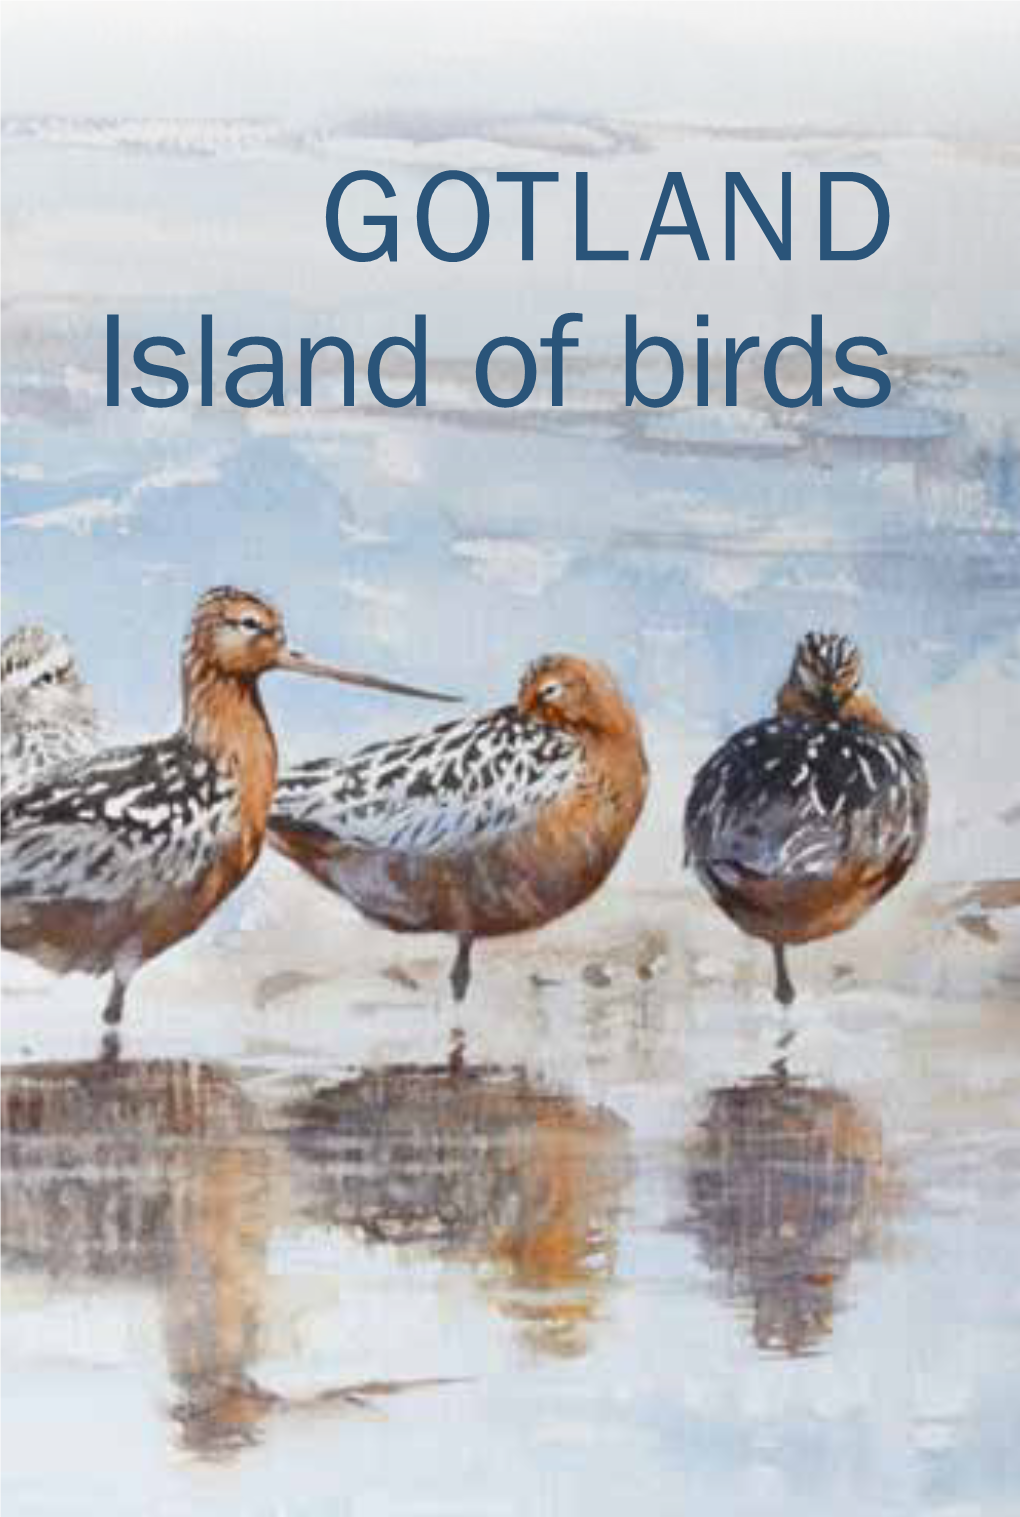 Island of Birds White-Tailed Eagle Cover: Bar-Tailed Godwits in the Bleak Winter Light, a White-Tailed Eagle on a Rock by the Sea